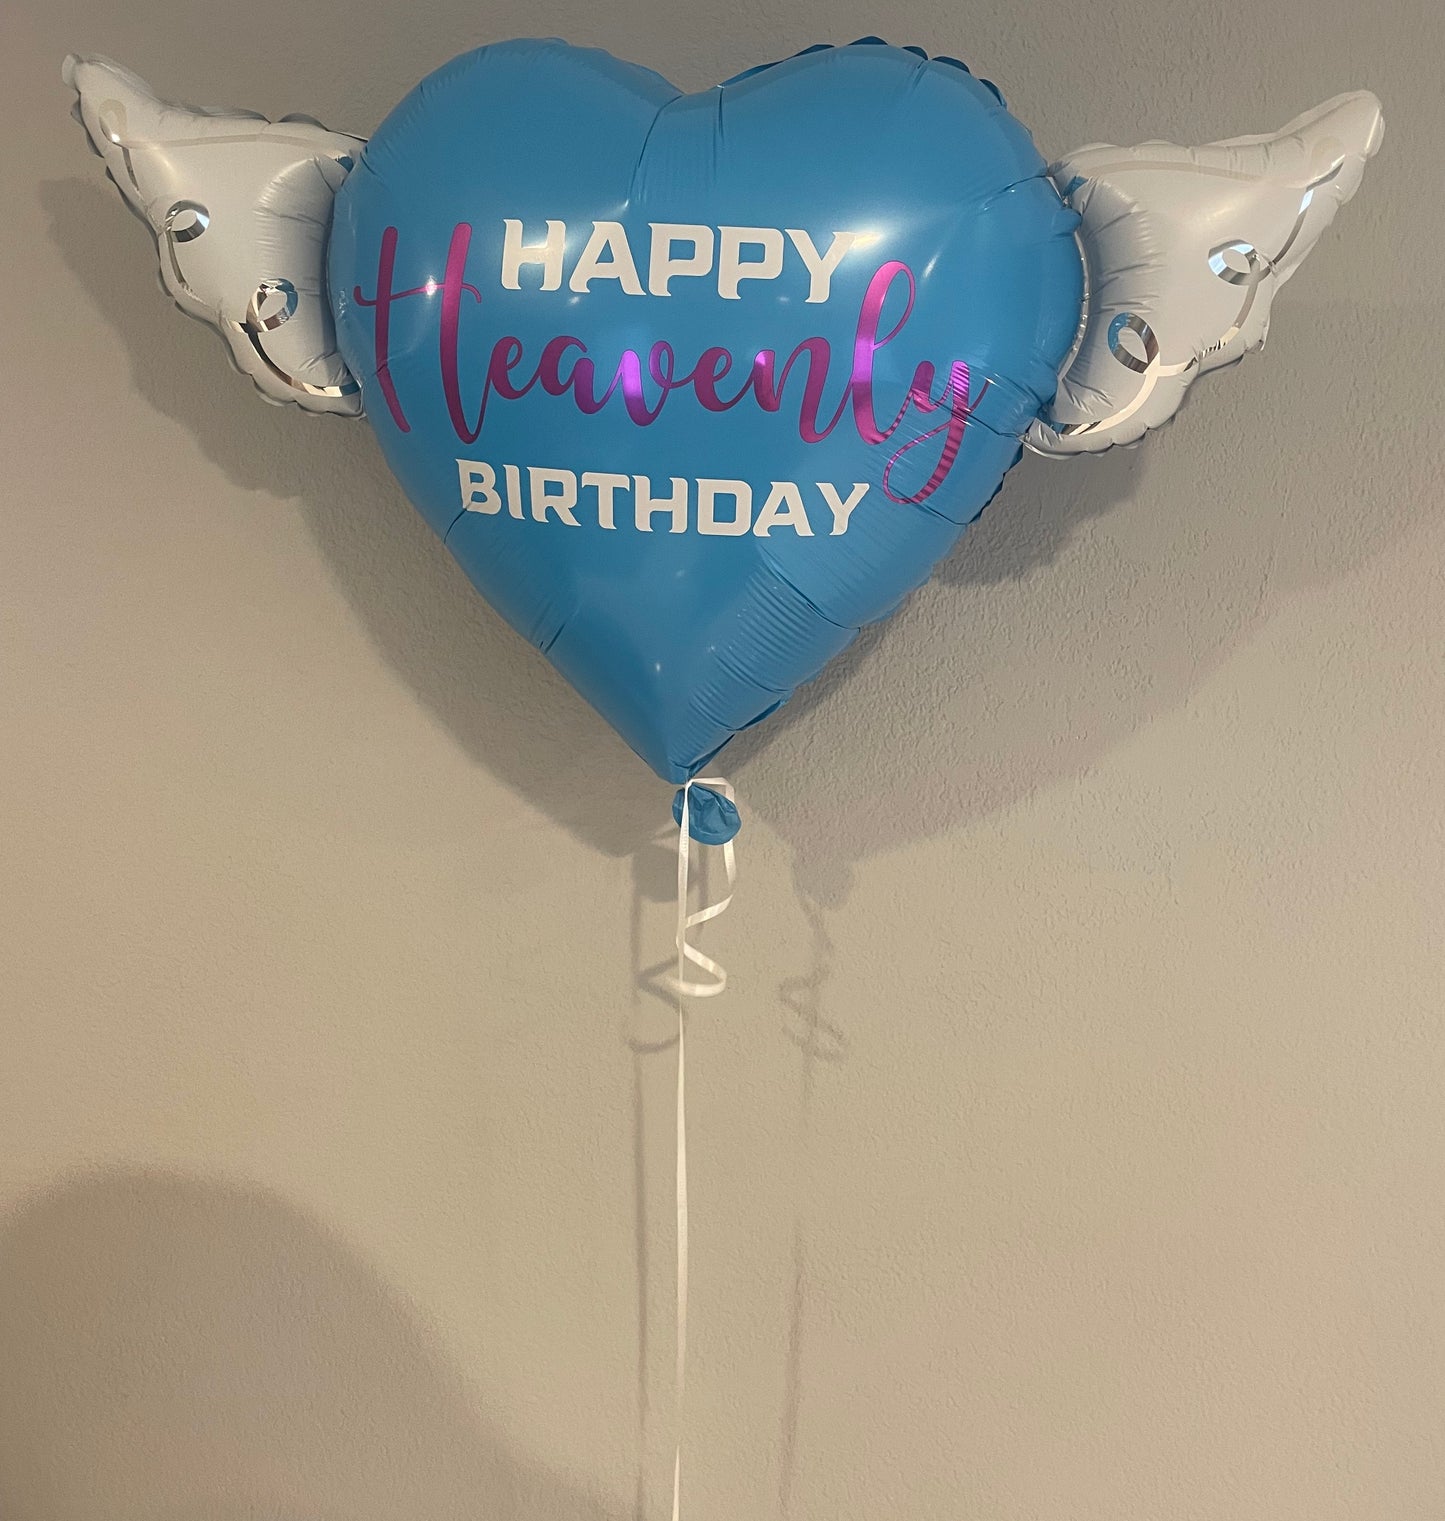 Happy Heavenly Birthday Heart Shaped Balloons with angel wings